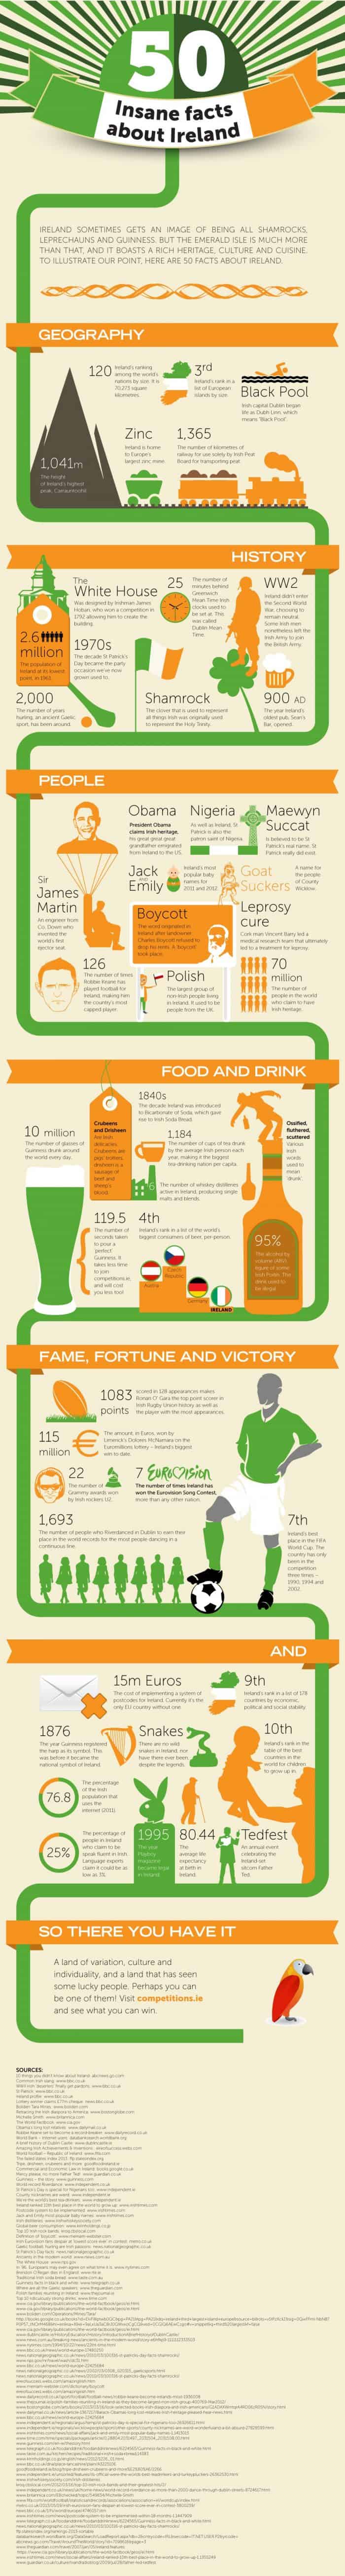 50 insane facts about ireland infographic